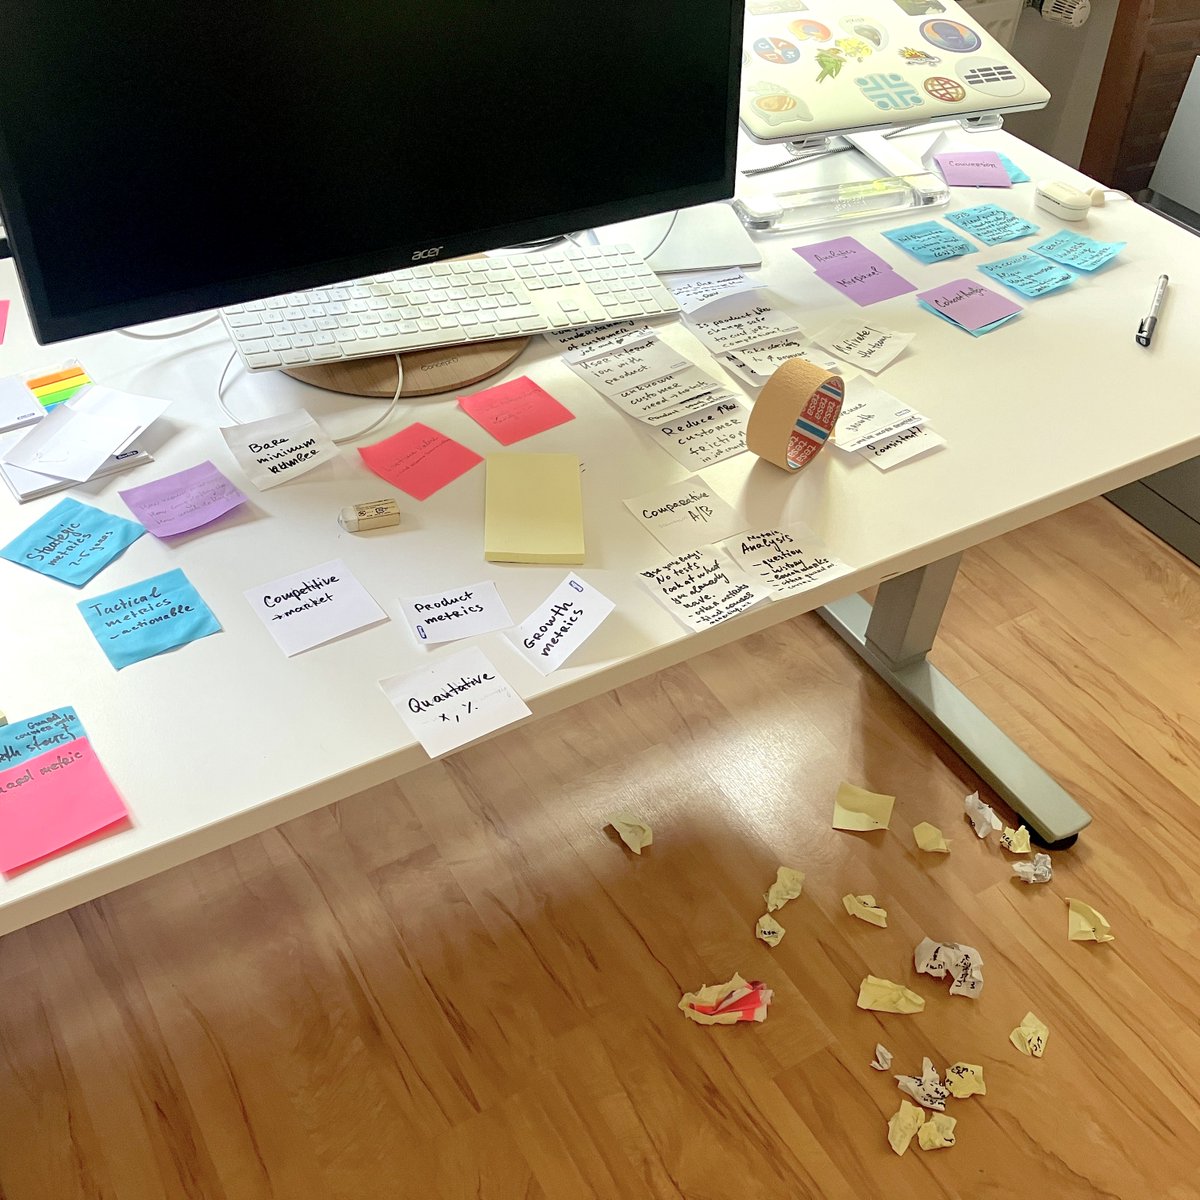 Hey folks, I've made a product metrics mood board! (Some of the stickies were discarded for clarity 😄) Check it out! 
linkedin.com/posts/ivan-rub…

#Growth #ProductMetrics #DataDrivenDecisions #TeamMotivation #CustomerCentricity #ProductLedGrowth